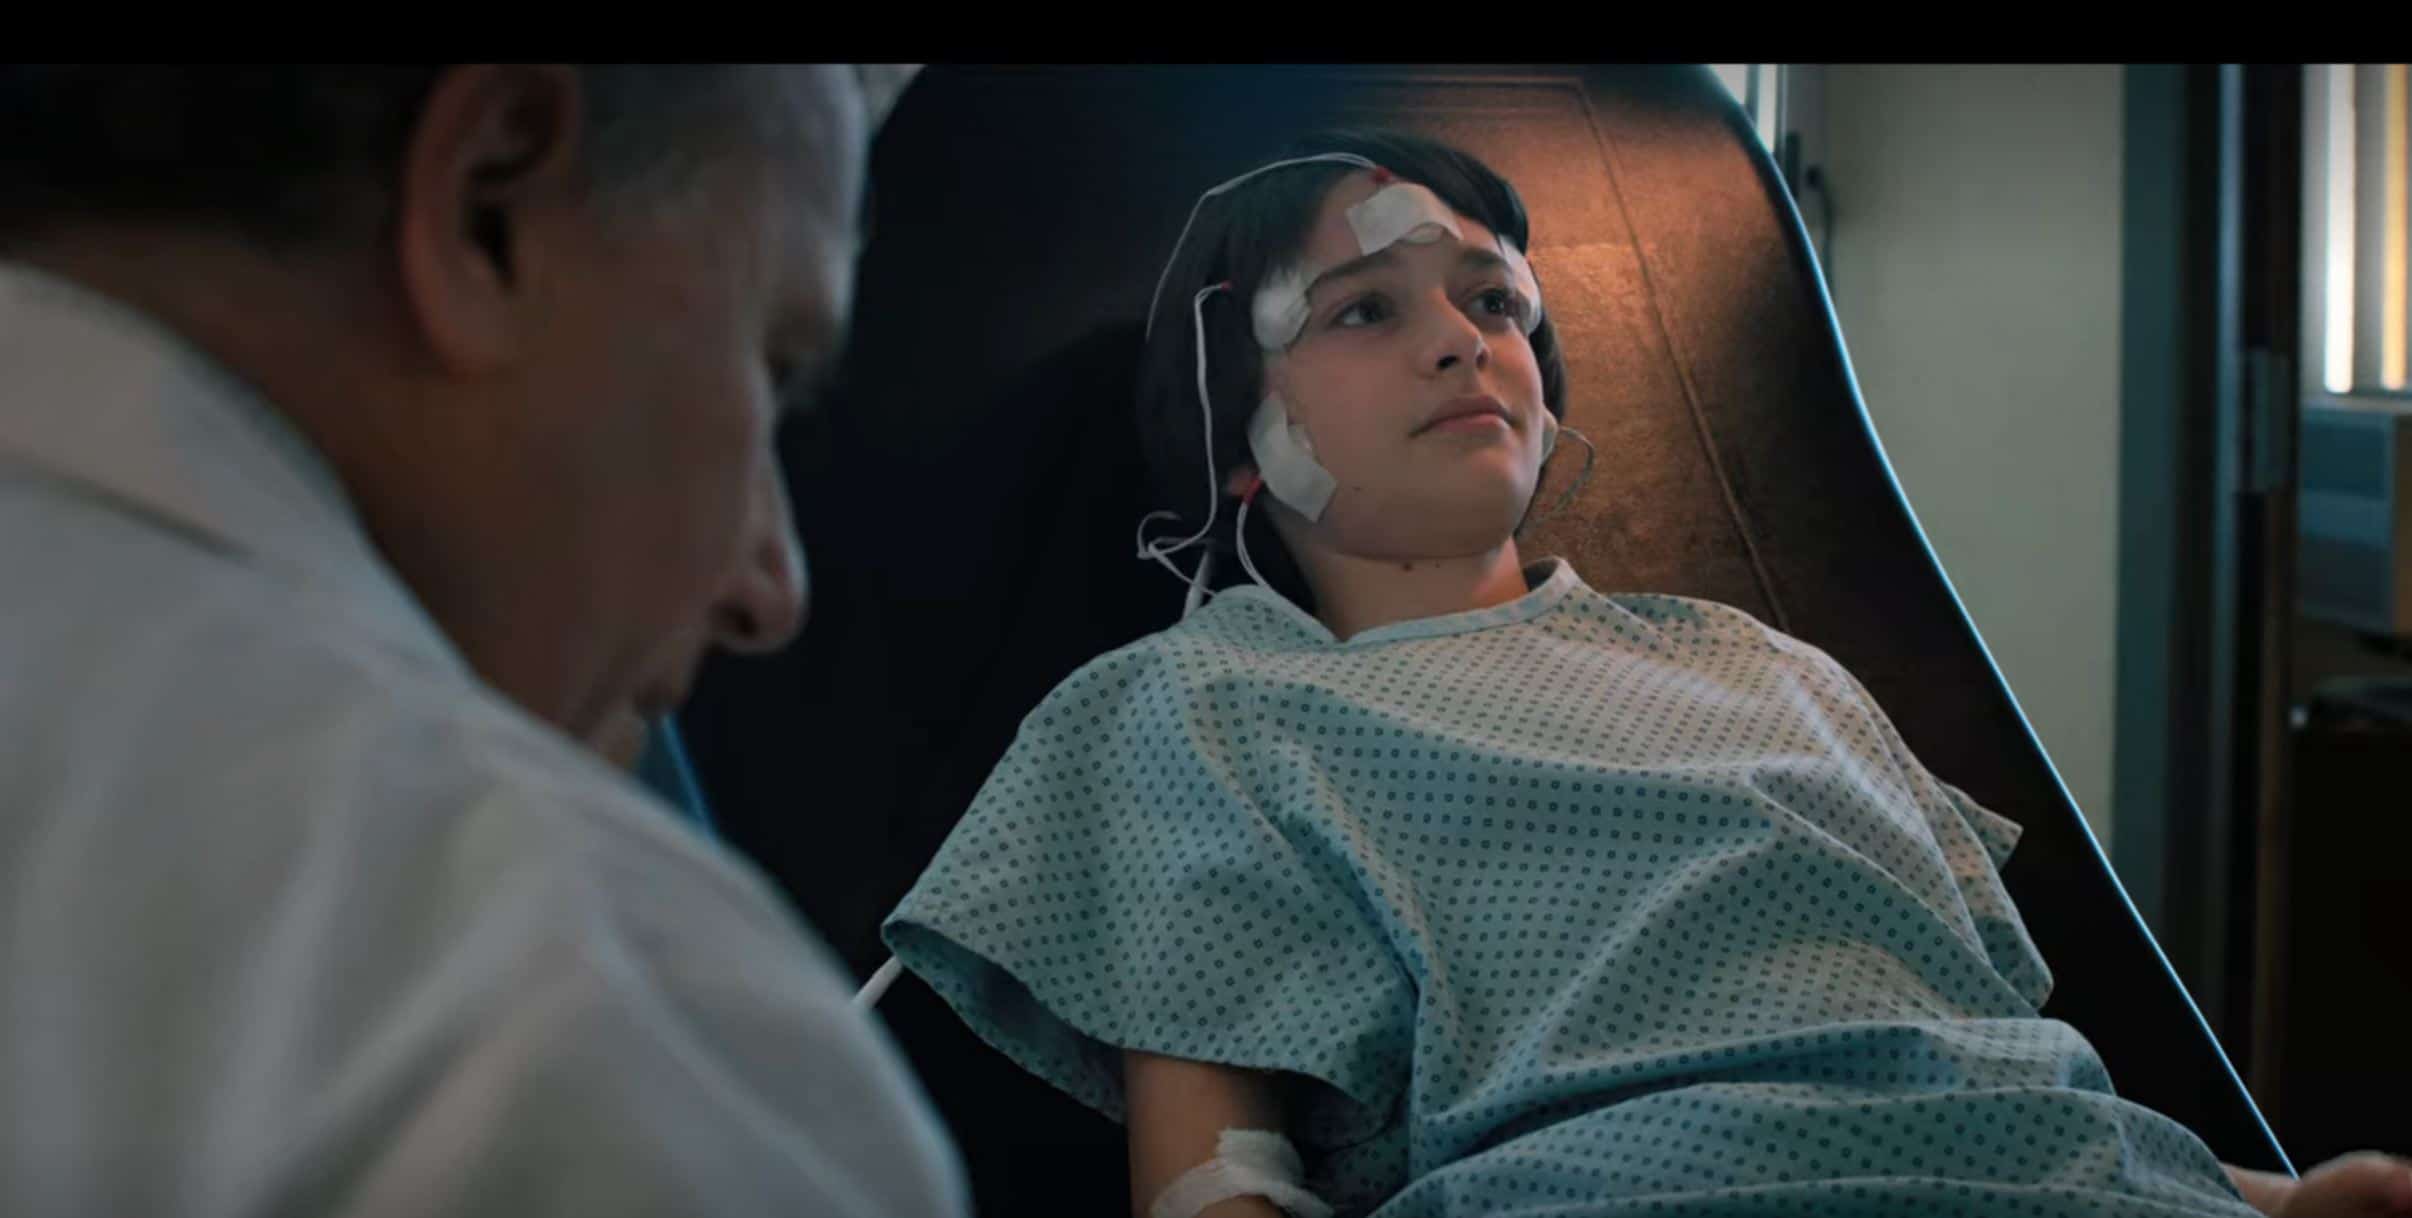 Will Byers from Stranger Things gets an EEG